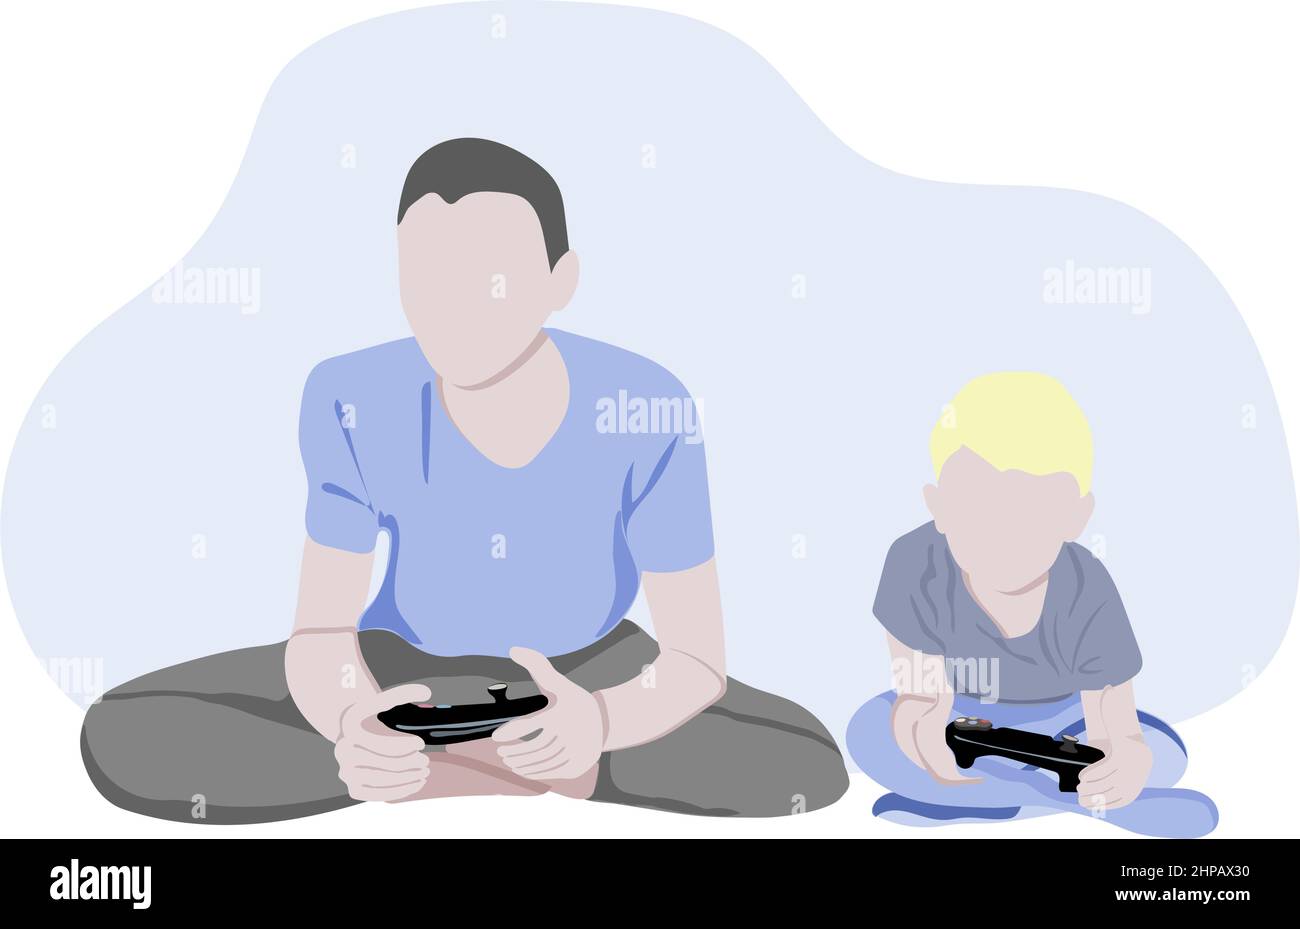 Family: father with son playing video games - cartoon characters illustrations isolated on white background. A young father and his child are sitting, Stock Vector